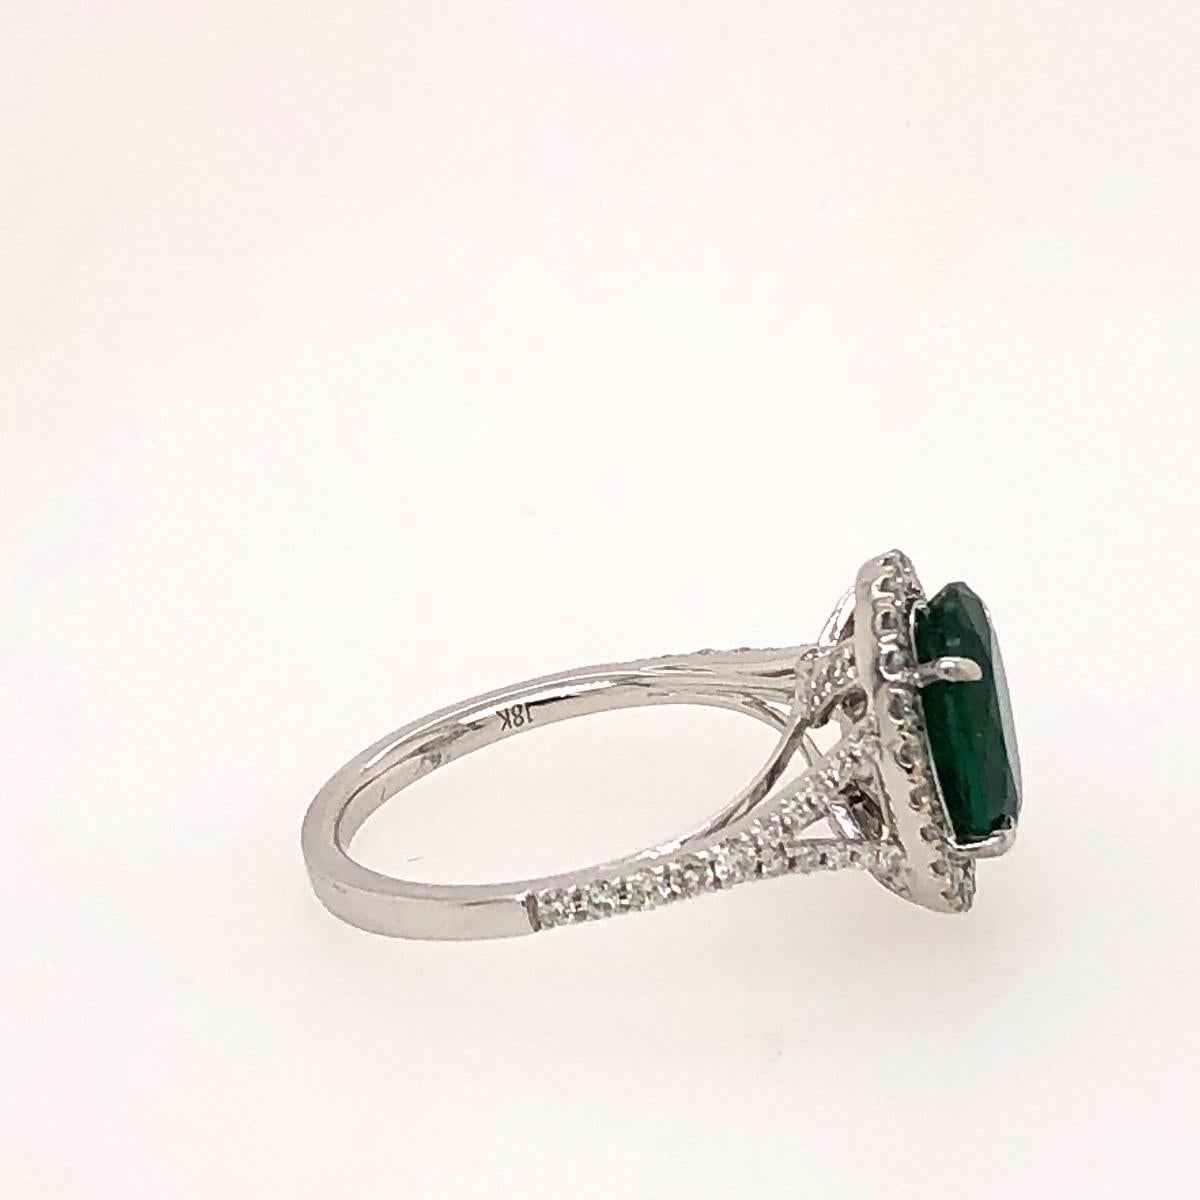 Style: Green Emerald Ring Surrounded With Diamonds On The Shanks 

Metal type: 18kt white and yellow gold 

1 2.01ct oval vivid green emerald 

0.53cts of Brilliant diamonds on the shanks 

Location Of Stone: Zambia 

Has 1 CDC Certificate. CDC